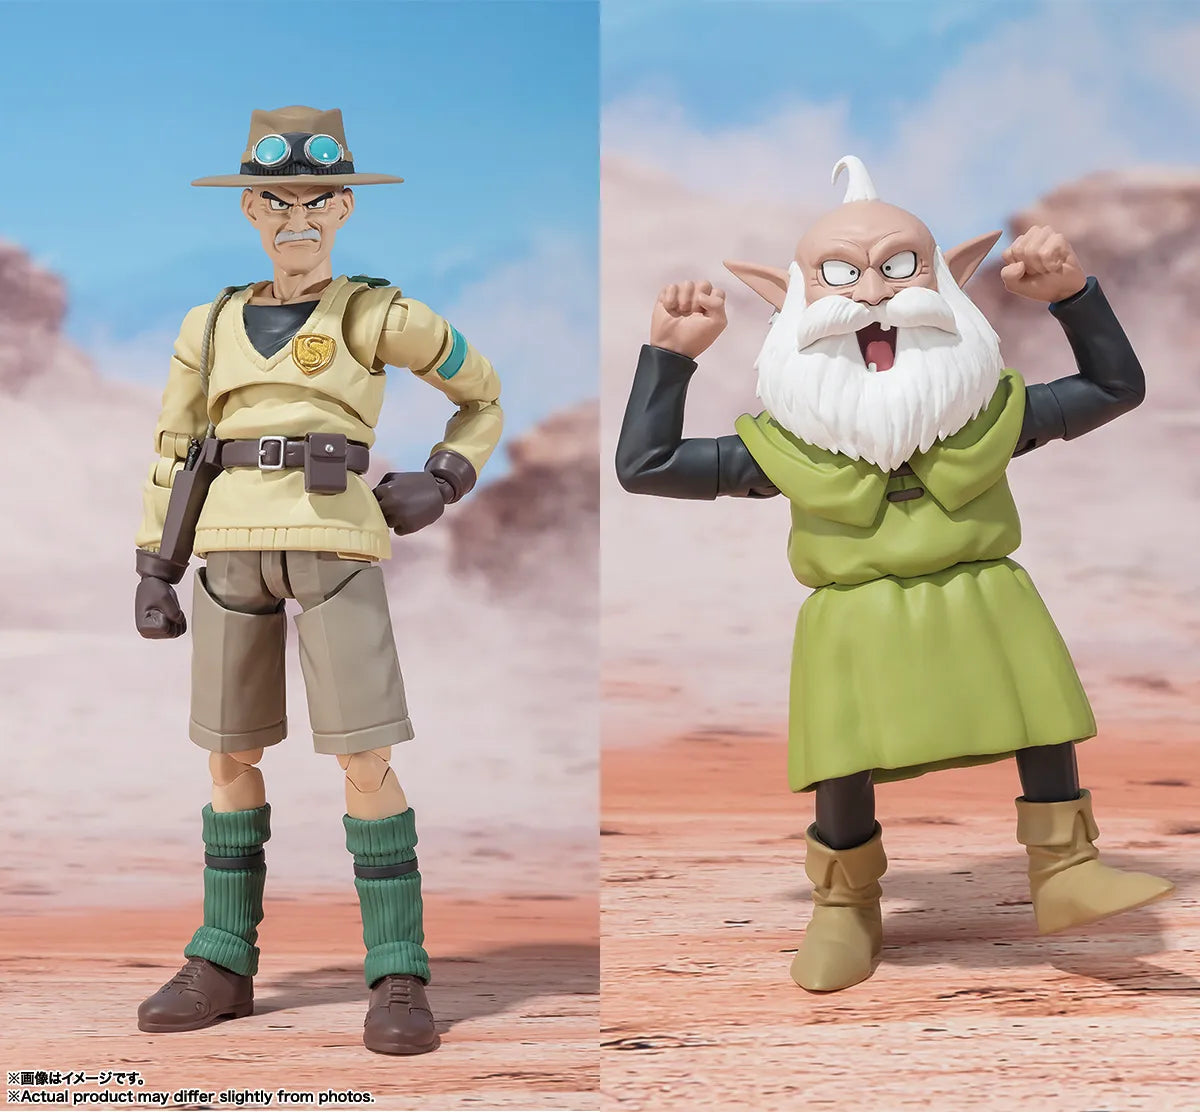 Pre Order Rao and Thief "Sand Land", TAMASHII NATIONS S.H.Figuarts